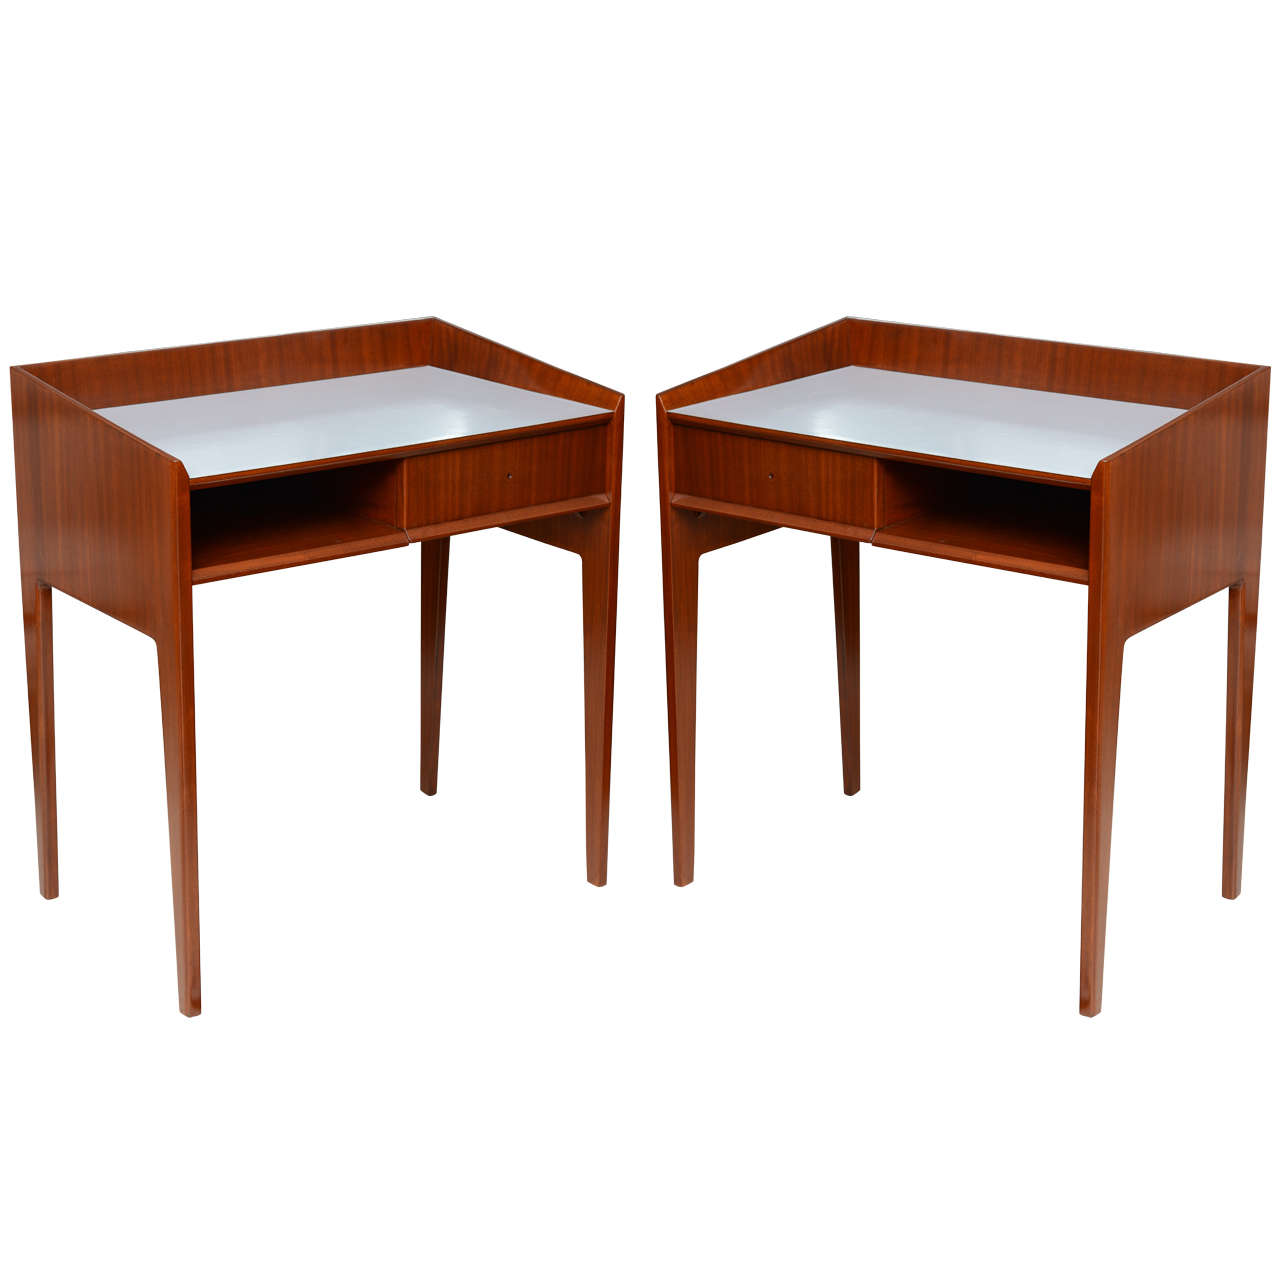 Rare Pair of Mahogany and Formica Side Tables in Style of Gio Ponti, Italy 1950s For Sale